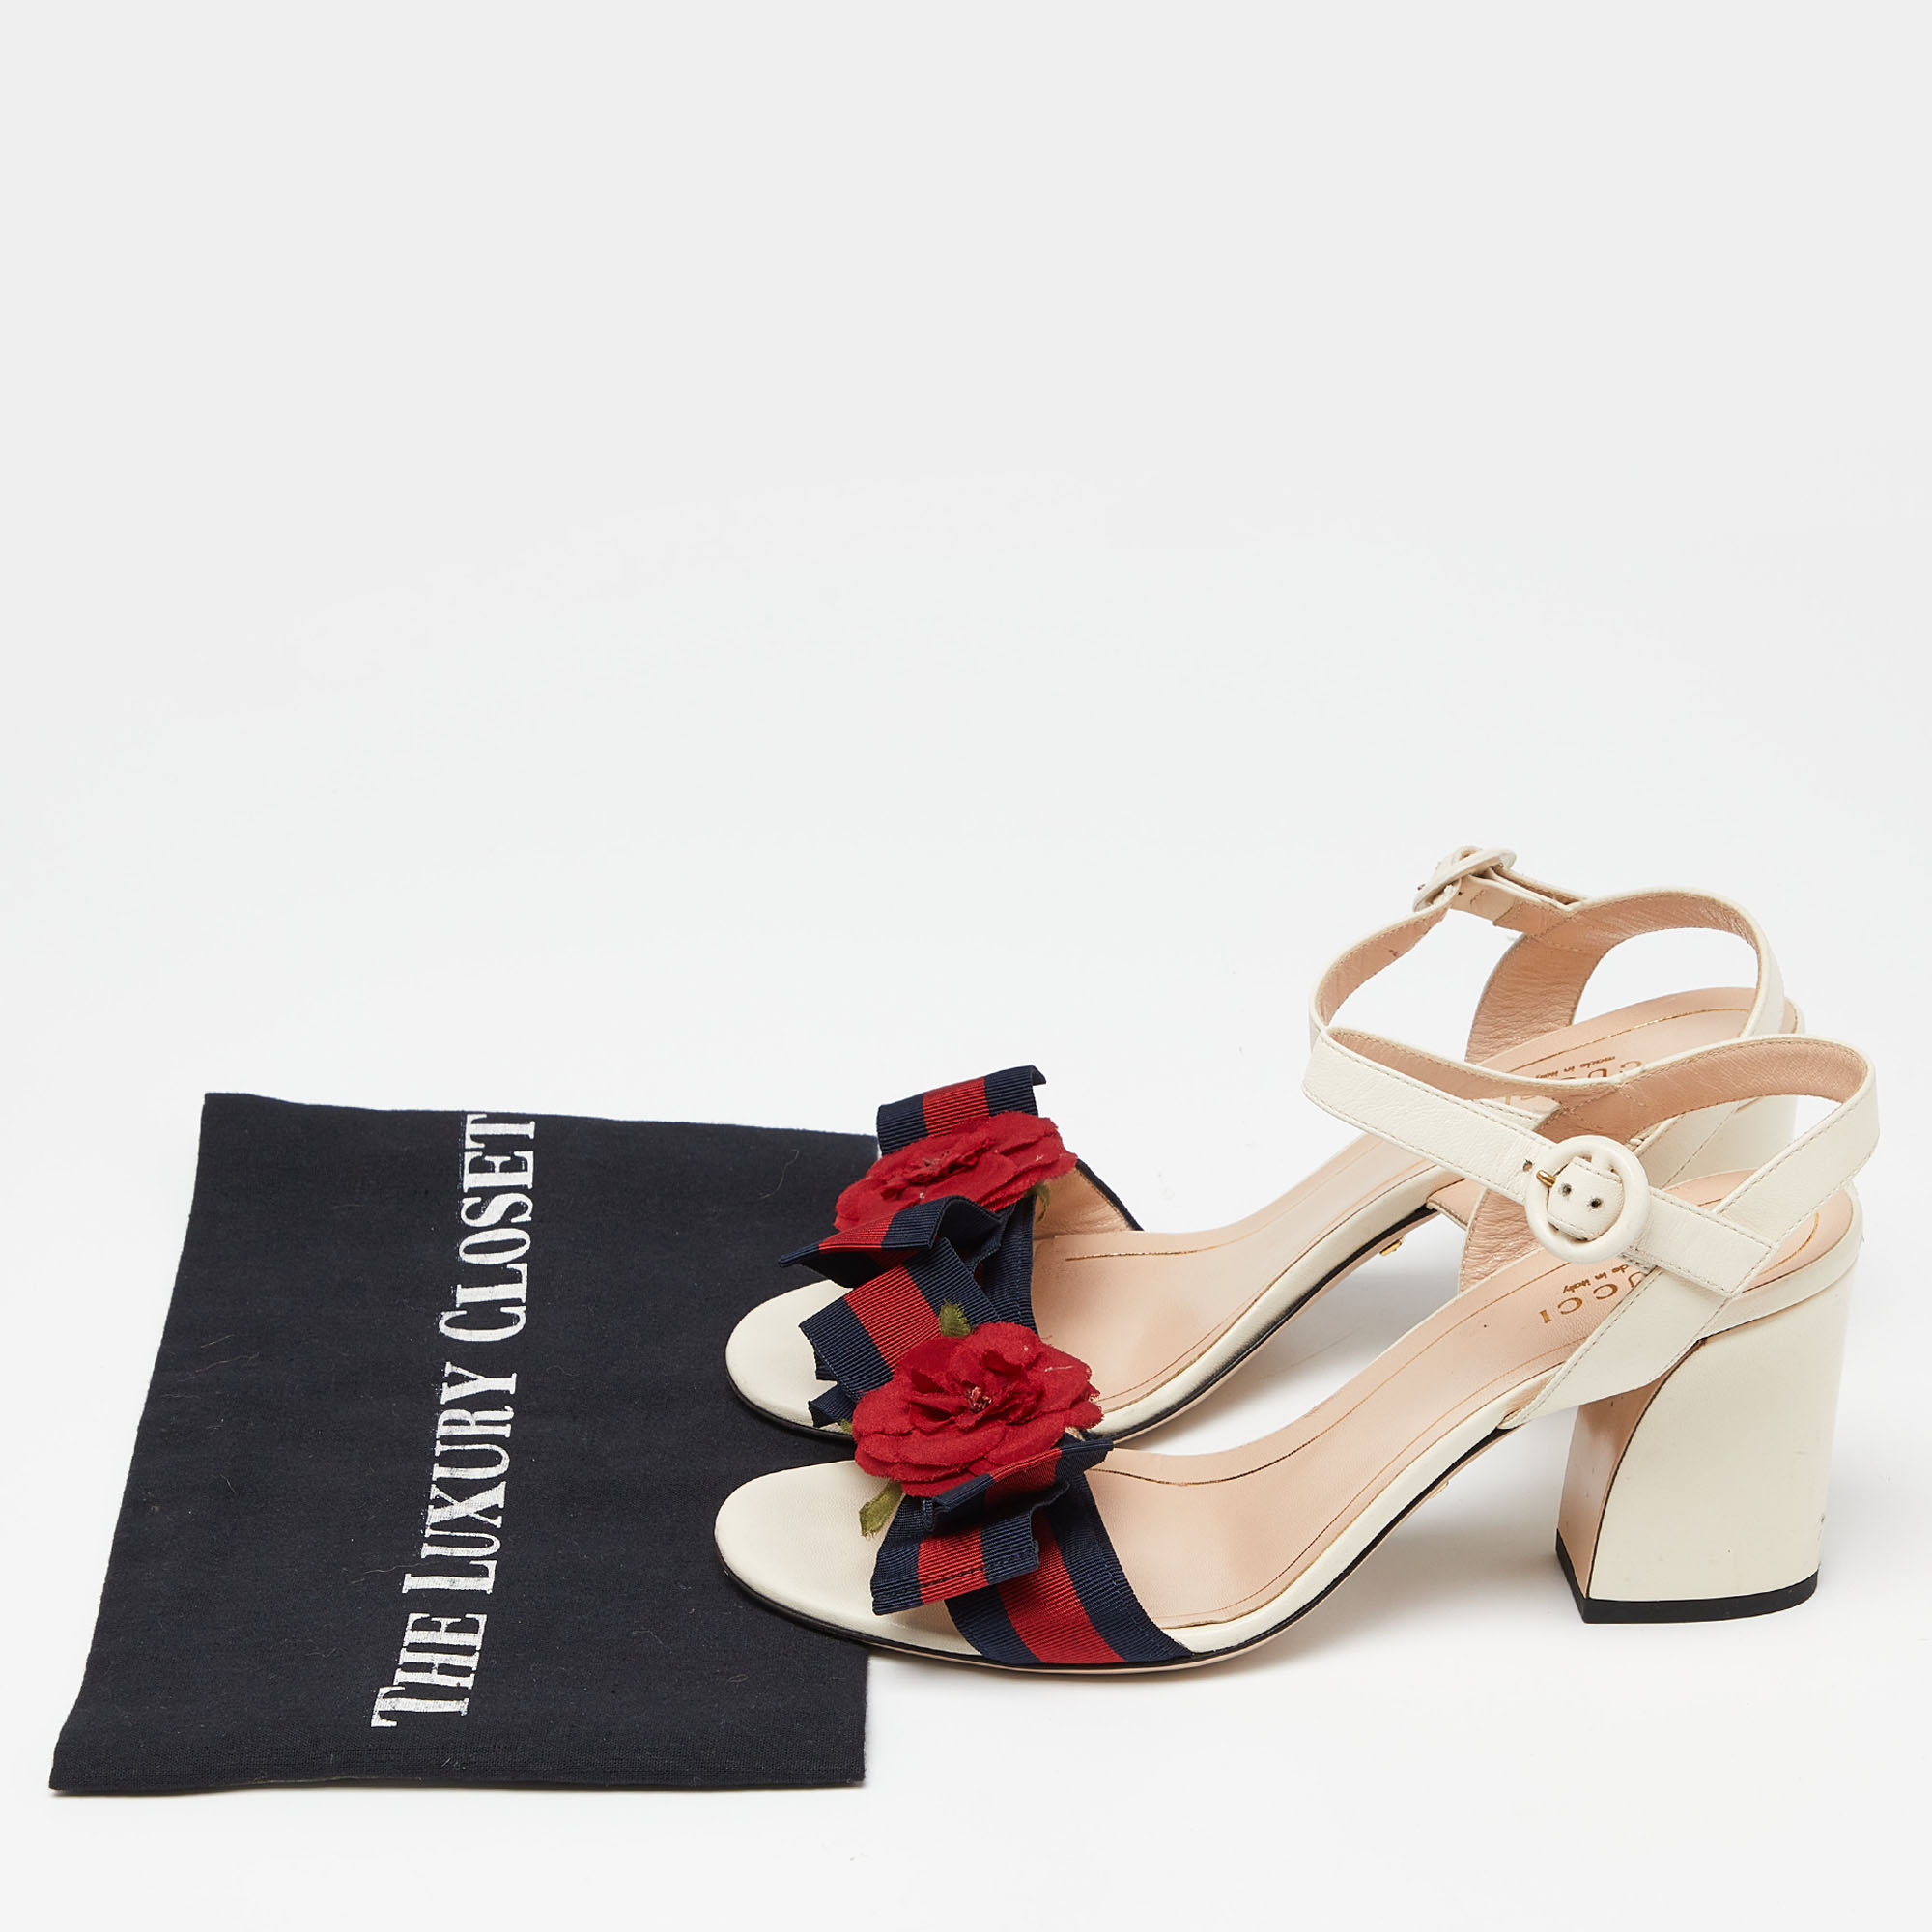 Gucci Cream Leather And Canvas Bow Flower Ankle Strap Sandals Size 37.5